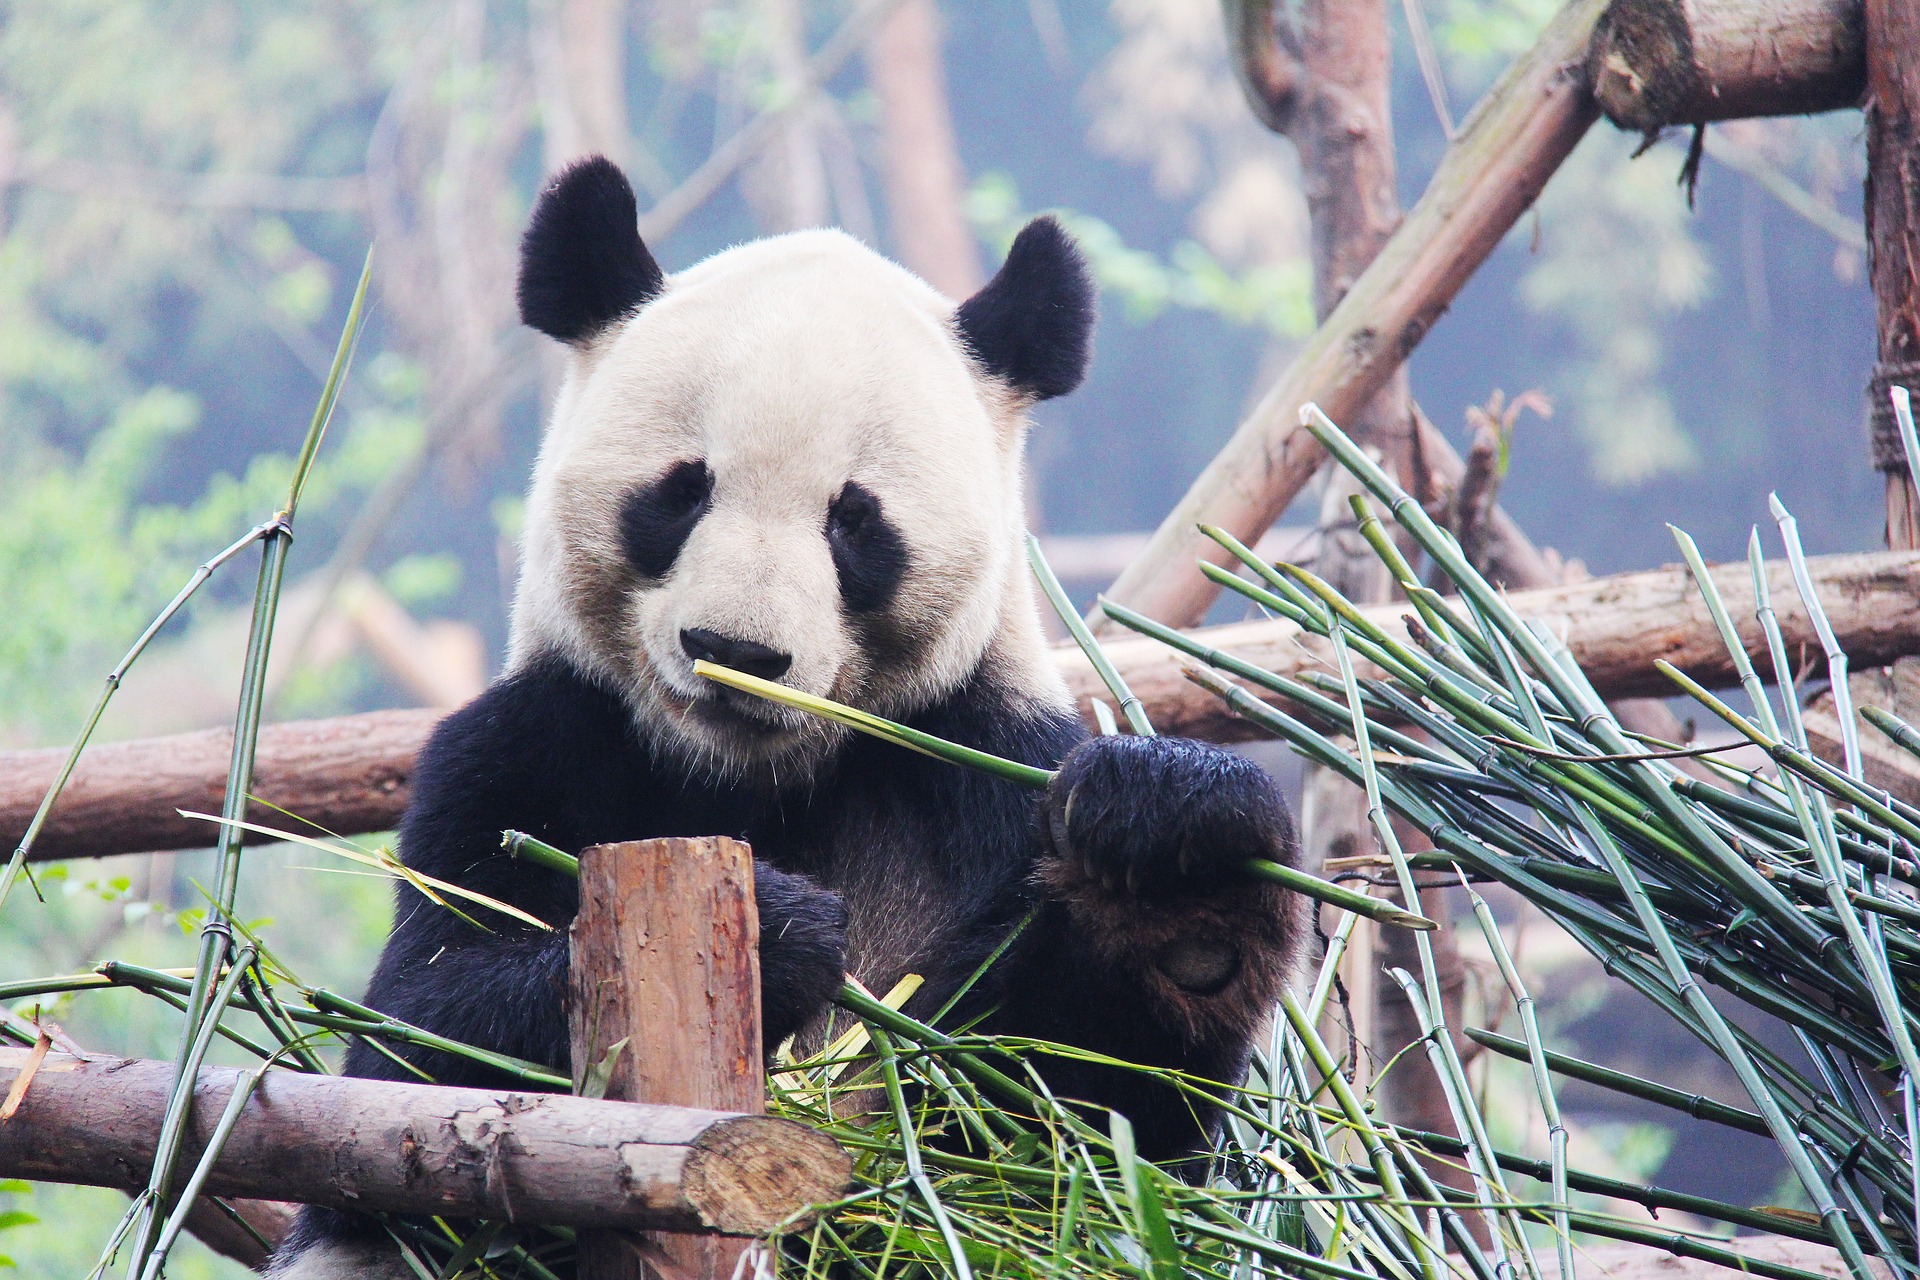 Check out the pandas in Chengdu